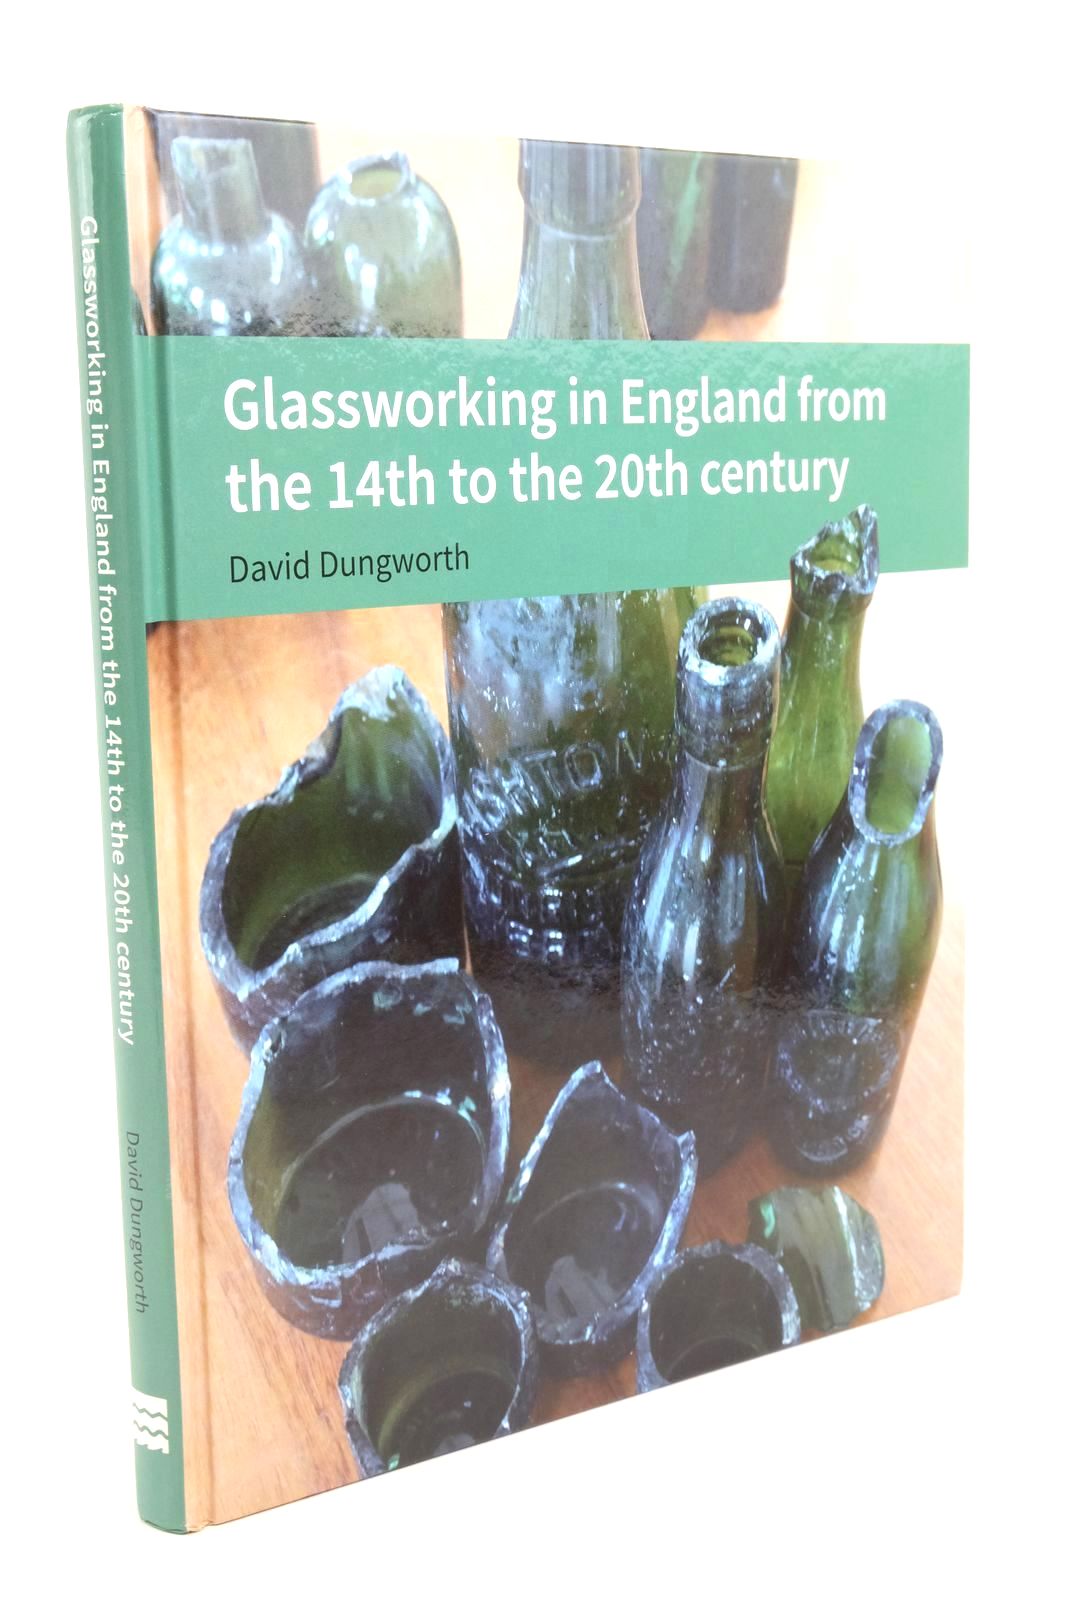 Photo of GLASSWORKING IN ENGLAND FROM THE 14TH TO THE 20TH CENTURY written by Dungworth, David published by Historic England (STOCK CODE: 1322442)  for sale by Stella & Rose's Books